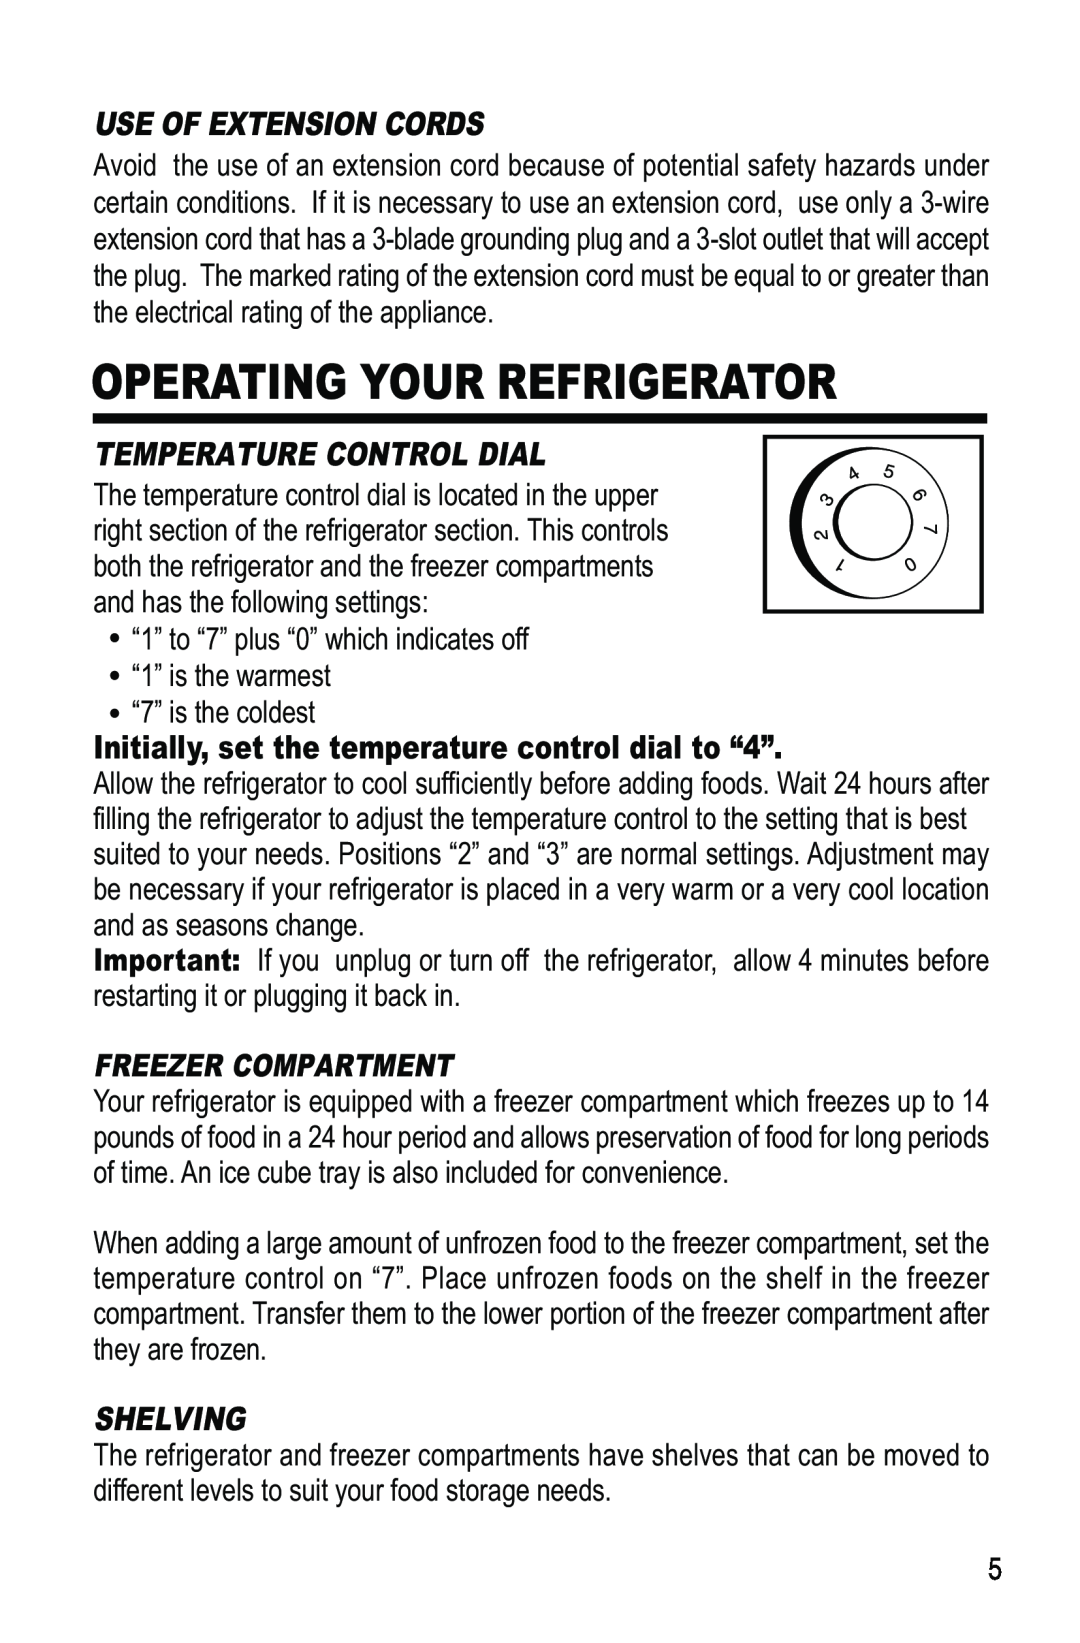 Haier HRF-350ME, HRF-300ME manual Operating Your Refrigerator, Use Of Extension Cords, Temperature Control Dial, Shelving 